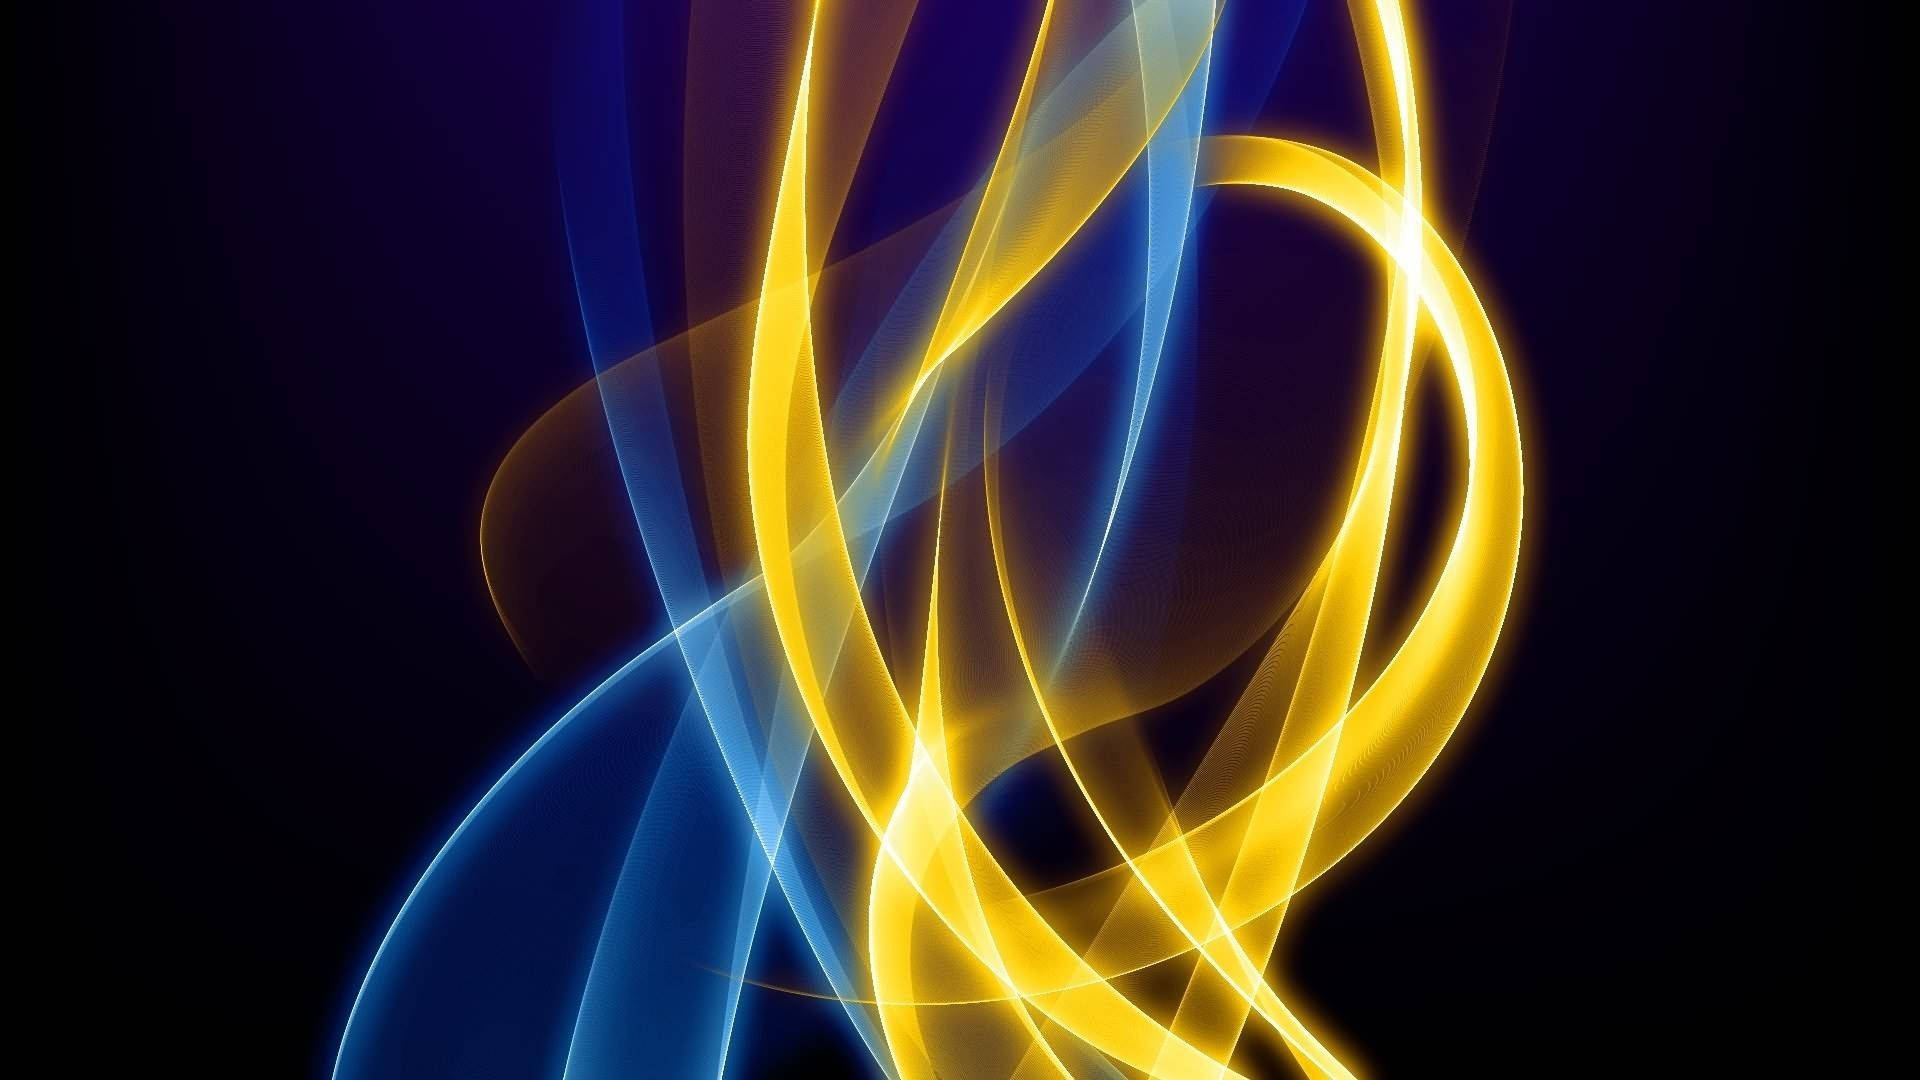 Blue And Gold Lights Wallpaper